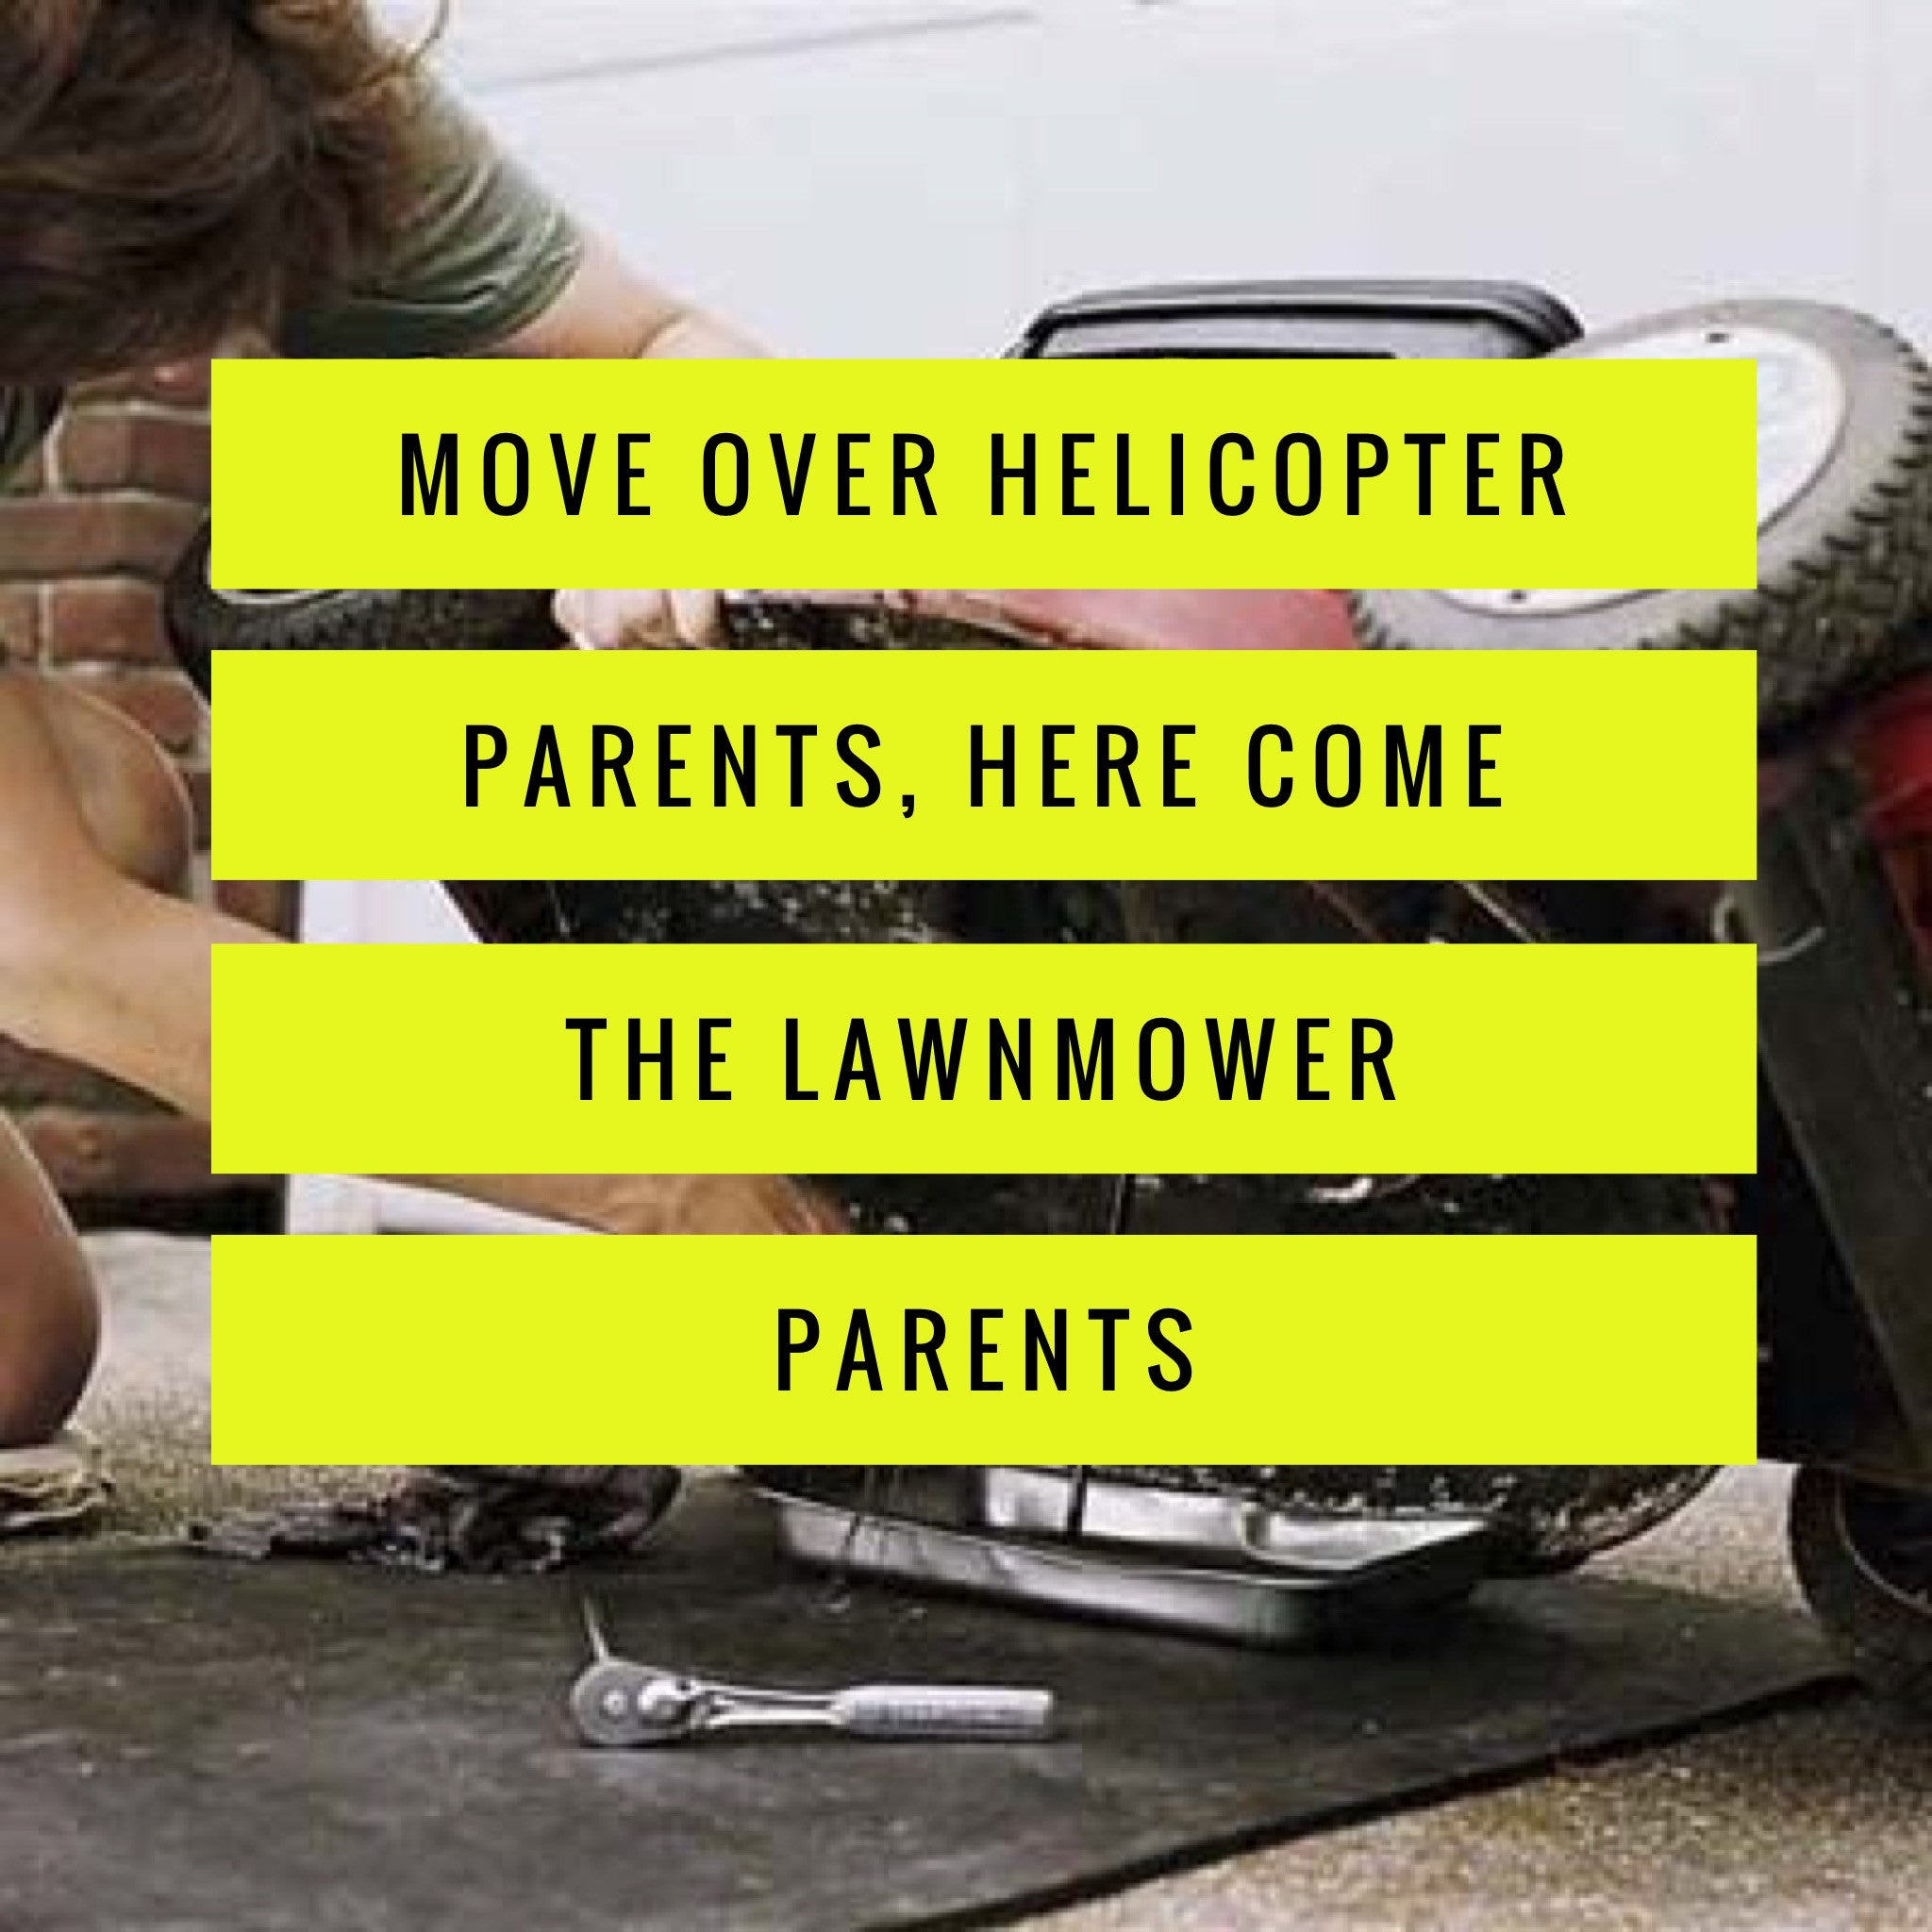 Move Over Helicopter Parents, Here Come the Lawnmower Parents